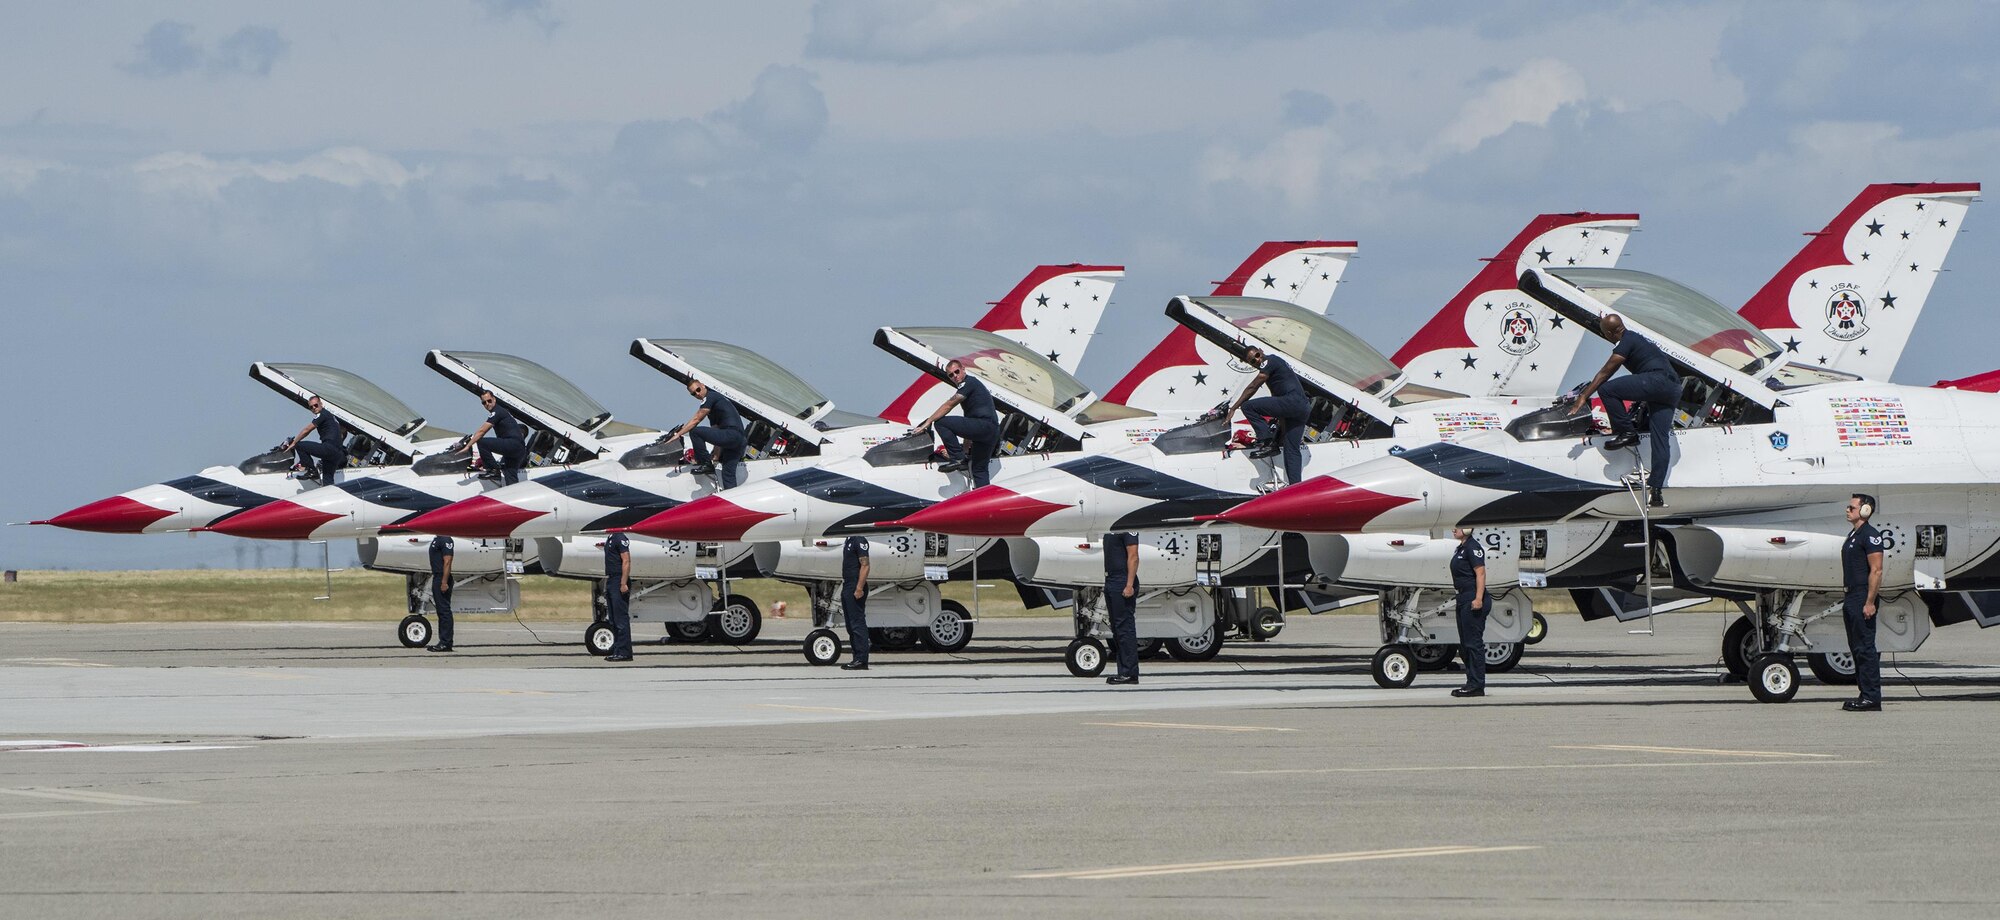 The United States Air Force Thunderbirds F-16 Fighting Falcons wait to perform at the Wings over Solano Air Show at Travis Air Force Base, Calif., May 6, 2017. The two-day event featured performances by the Thunderbirds, U.S. Army Golden Knights parachute team, flyovers and static displays. (U.S. Air Force photo by Heide Couch)